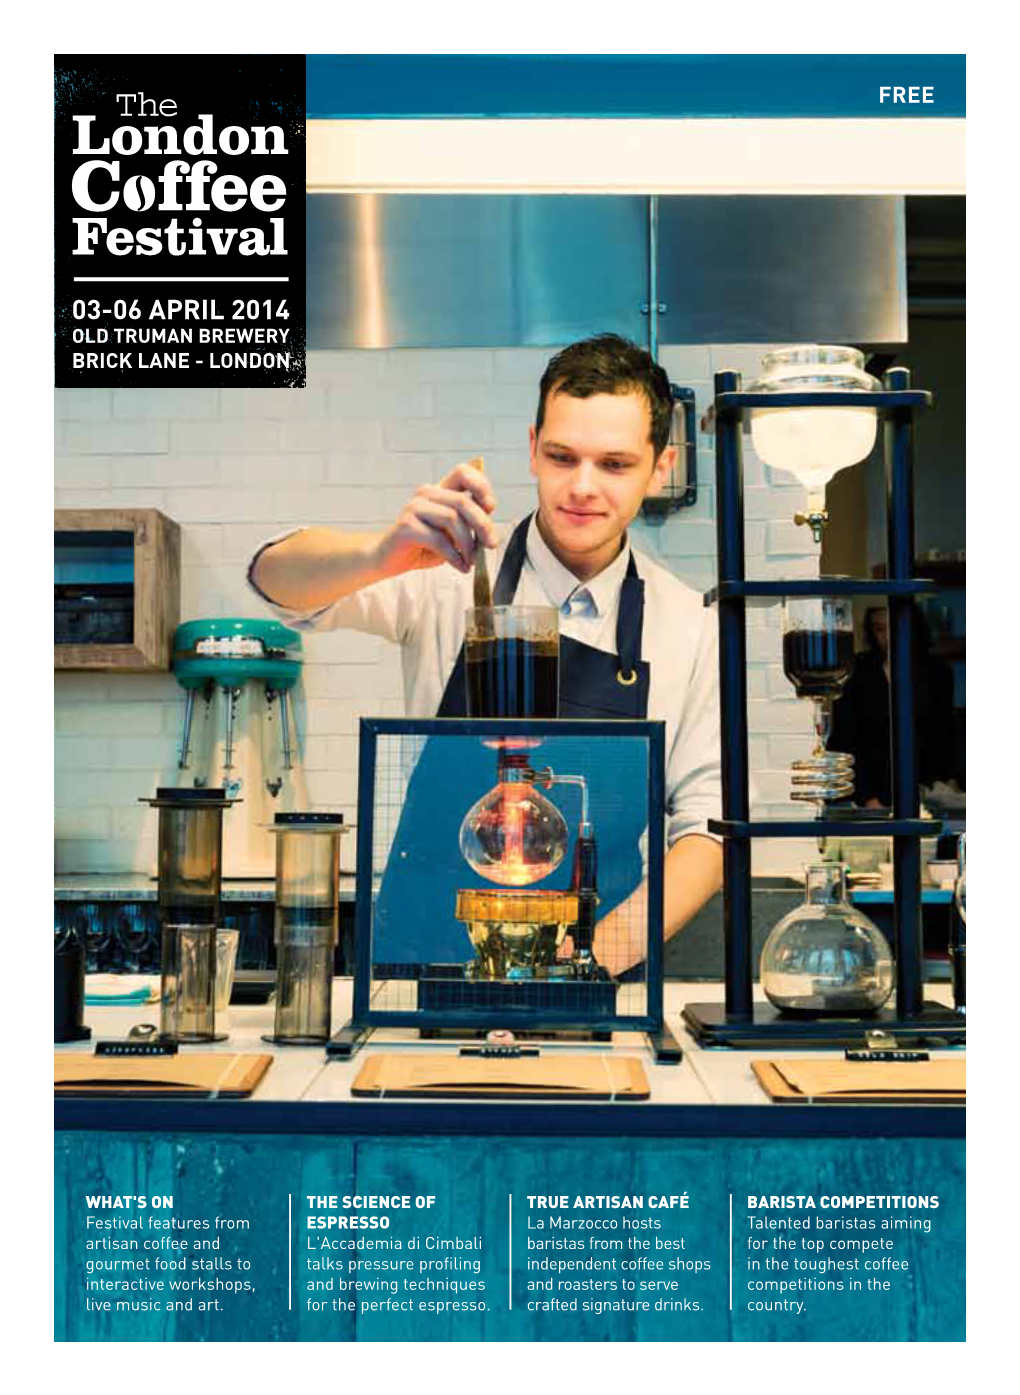 WHAT's on Festival Features from Artisan Coffee and Gourmet Food Stalls to Interactive Workshops, Live Music and Art. the SCIENC